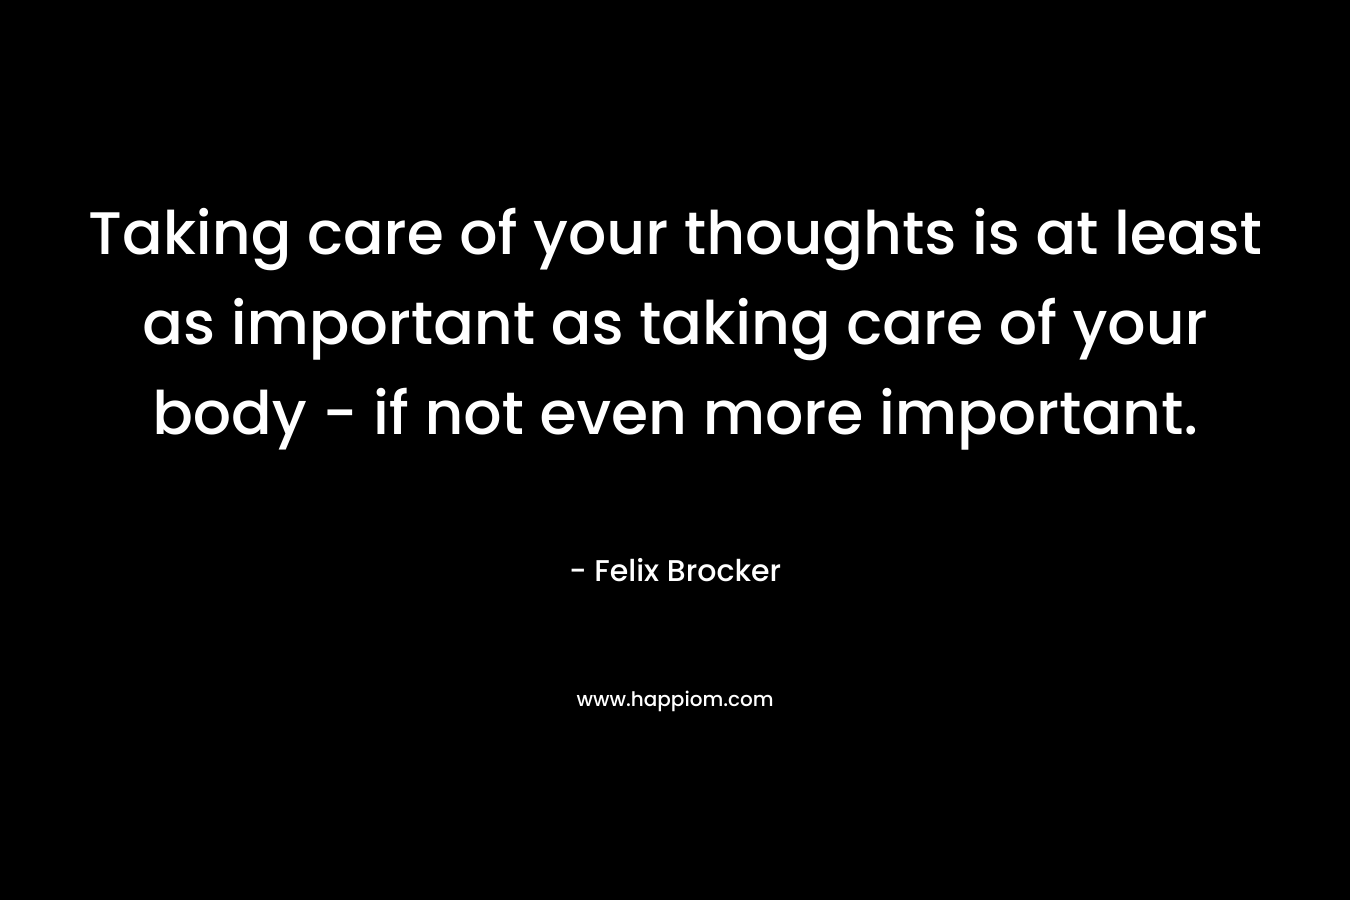 Taking care of your thoughts is at least as important as taking care of your body - if not even more important.